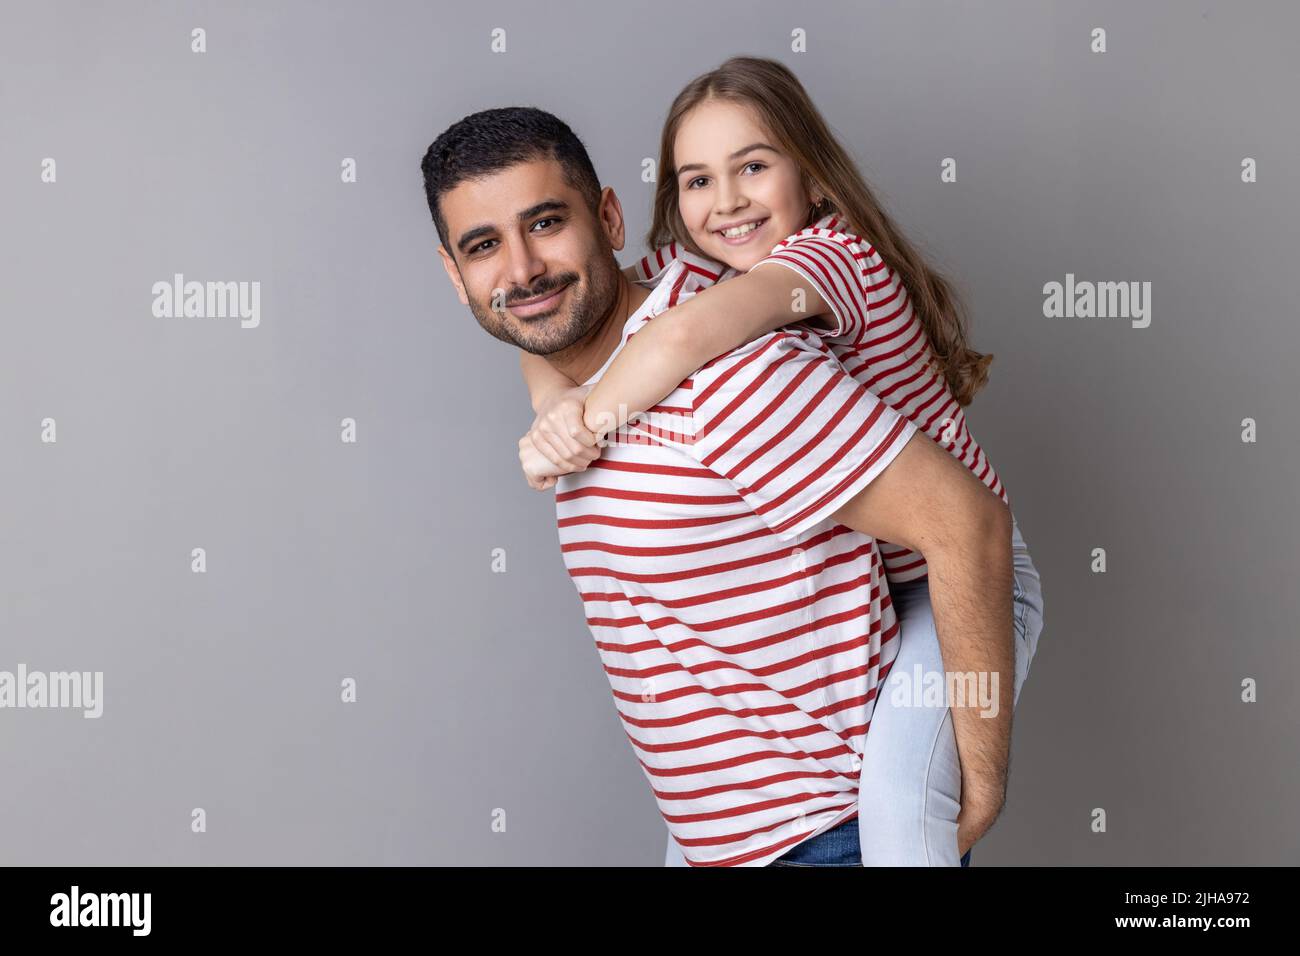 Portrait of smiling father and cute child in striped T-shirts posing together, dad give piggyback daughter, holding on back adorable kid. Indoor studio shot isolated on gray background. Stock Photo